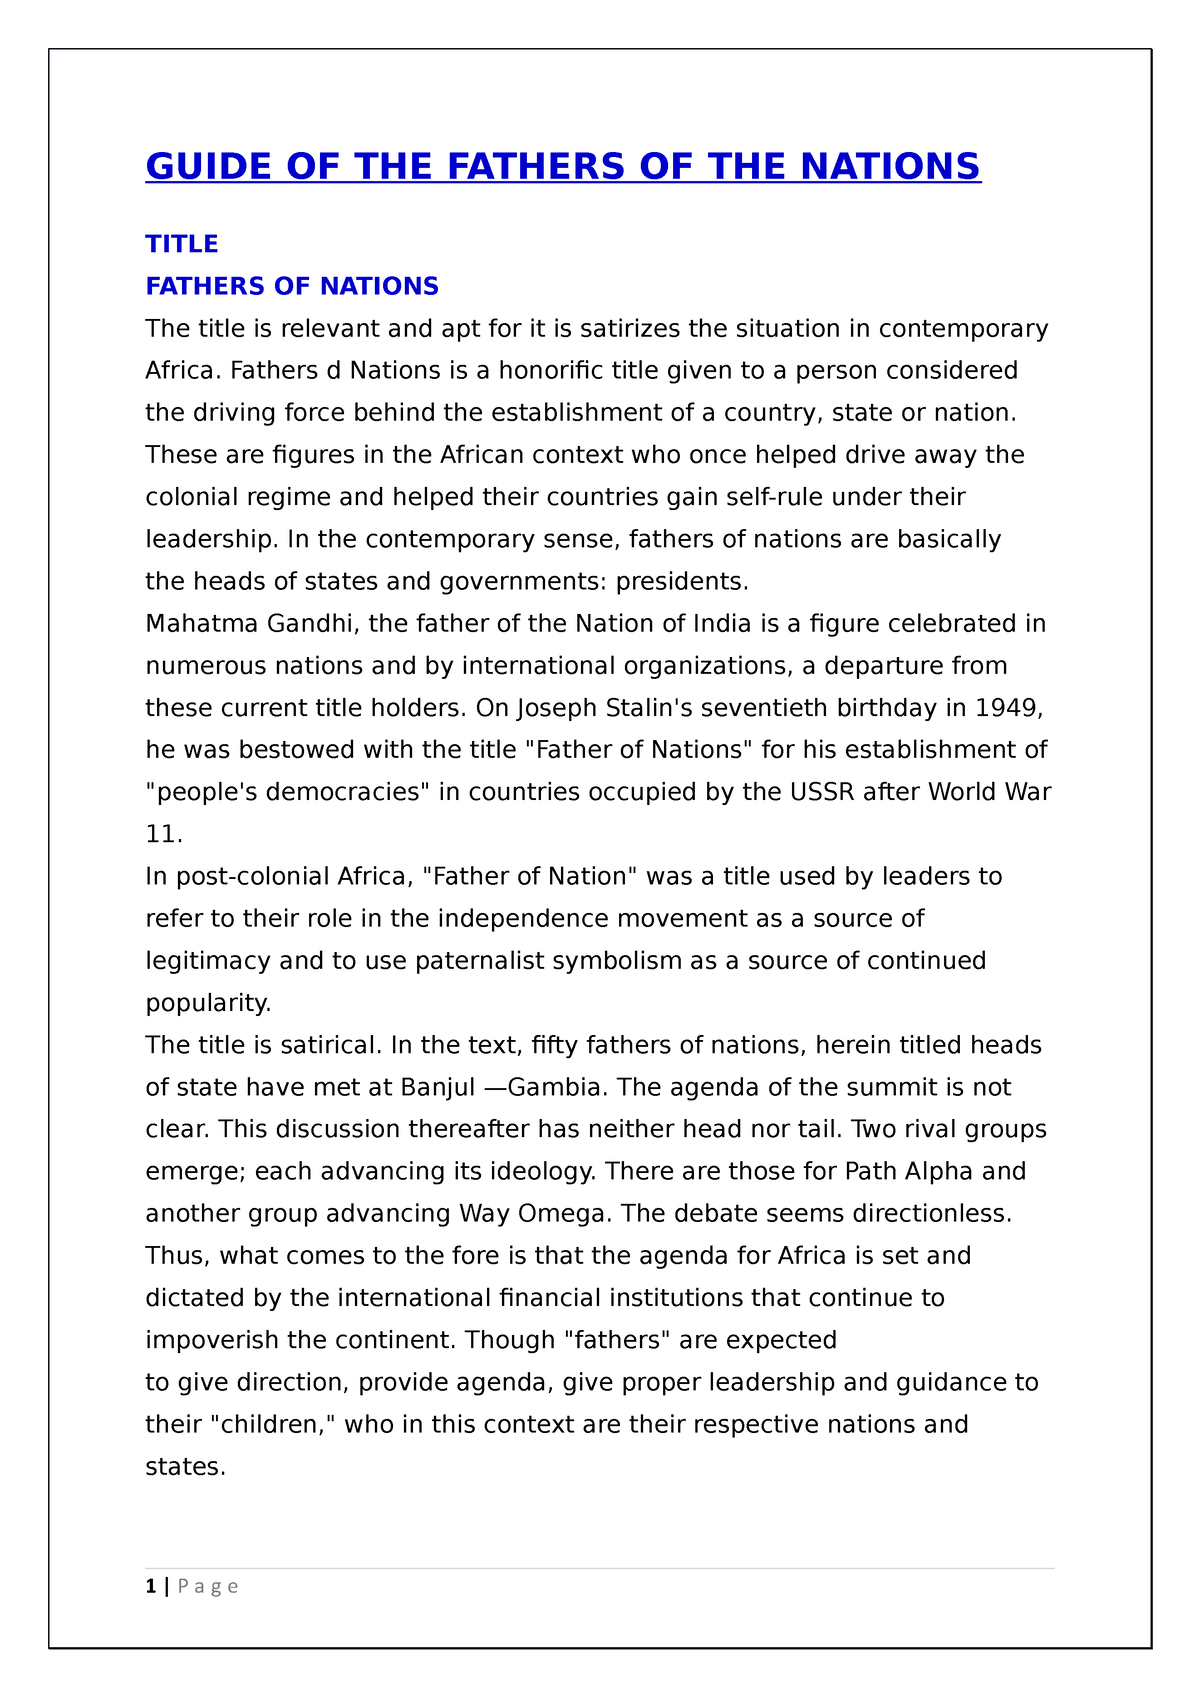 fathers of nations summary essay